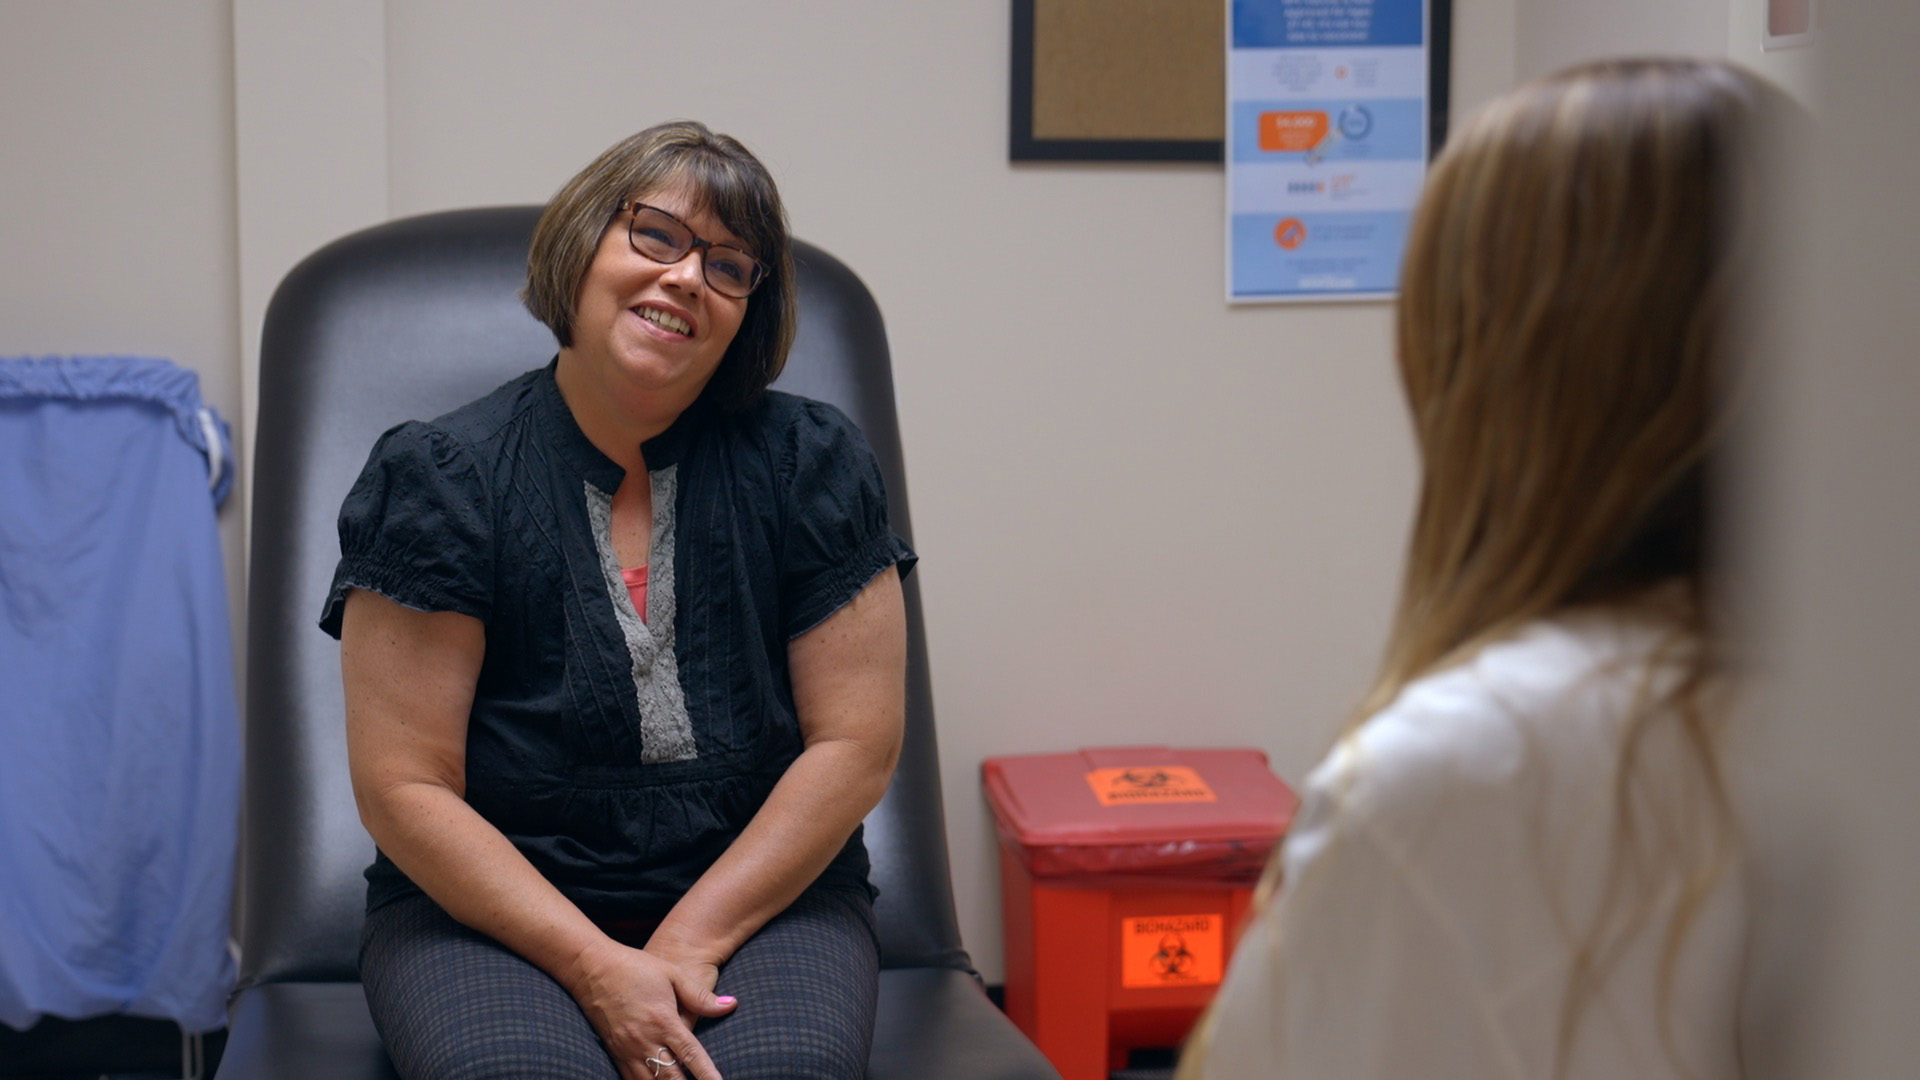 Lisa Wade at the Oklahoma City Indian Clinic, where she took her MyRisk test